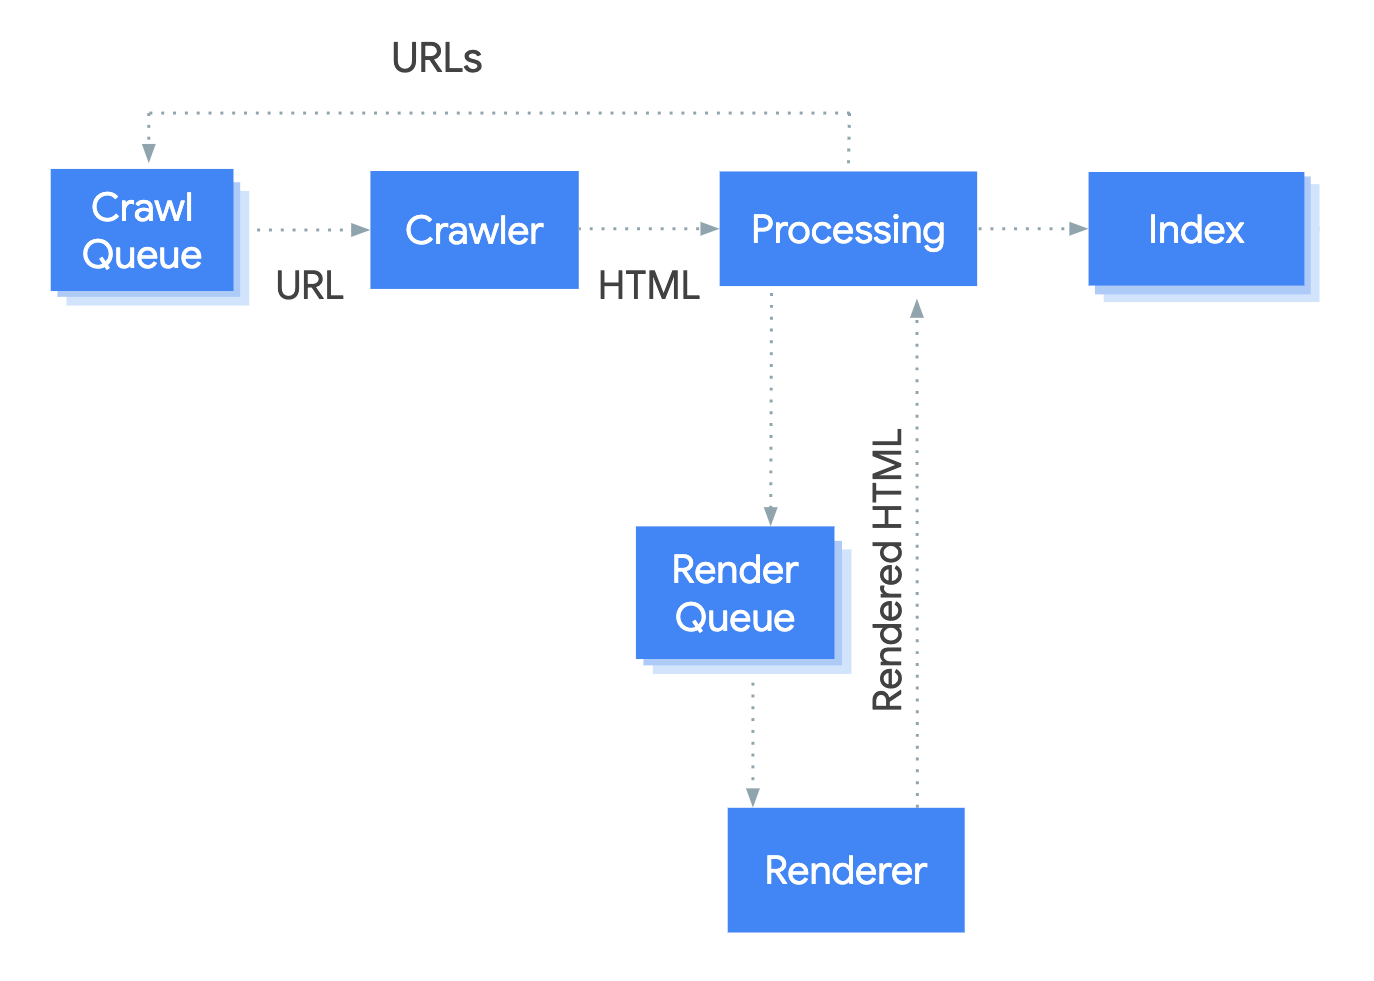 client-side rendering makes it more difficult for Google to crawl, render and index